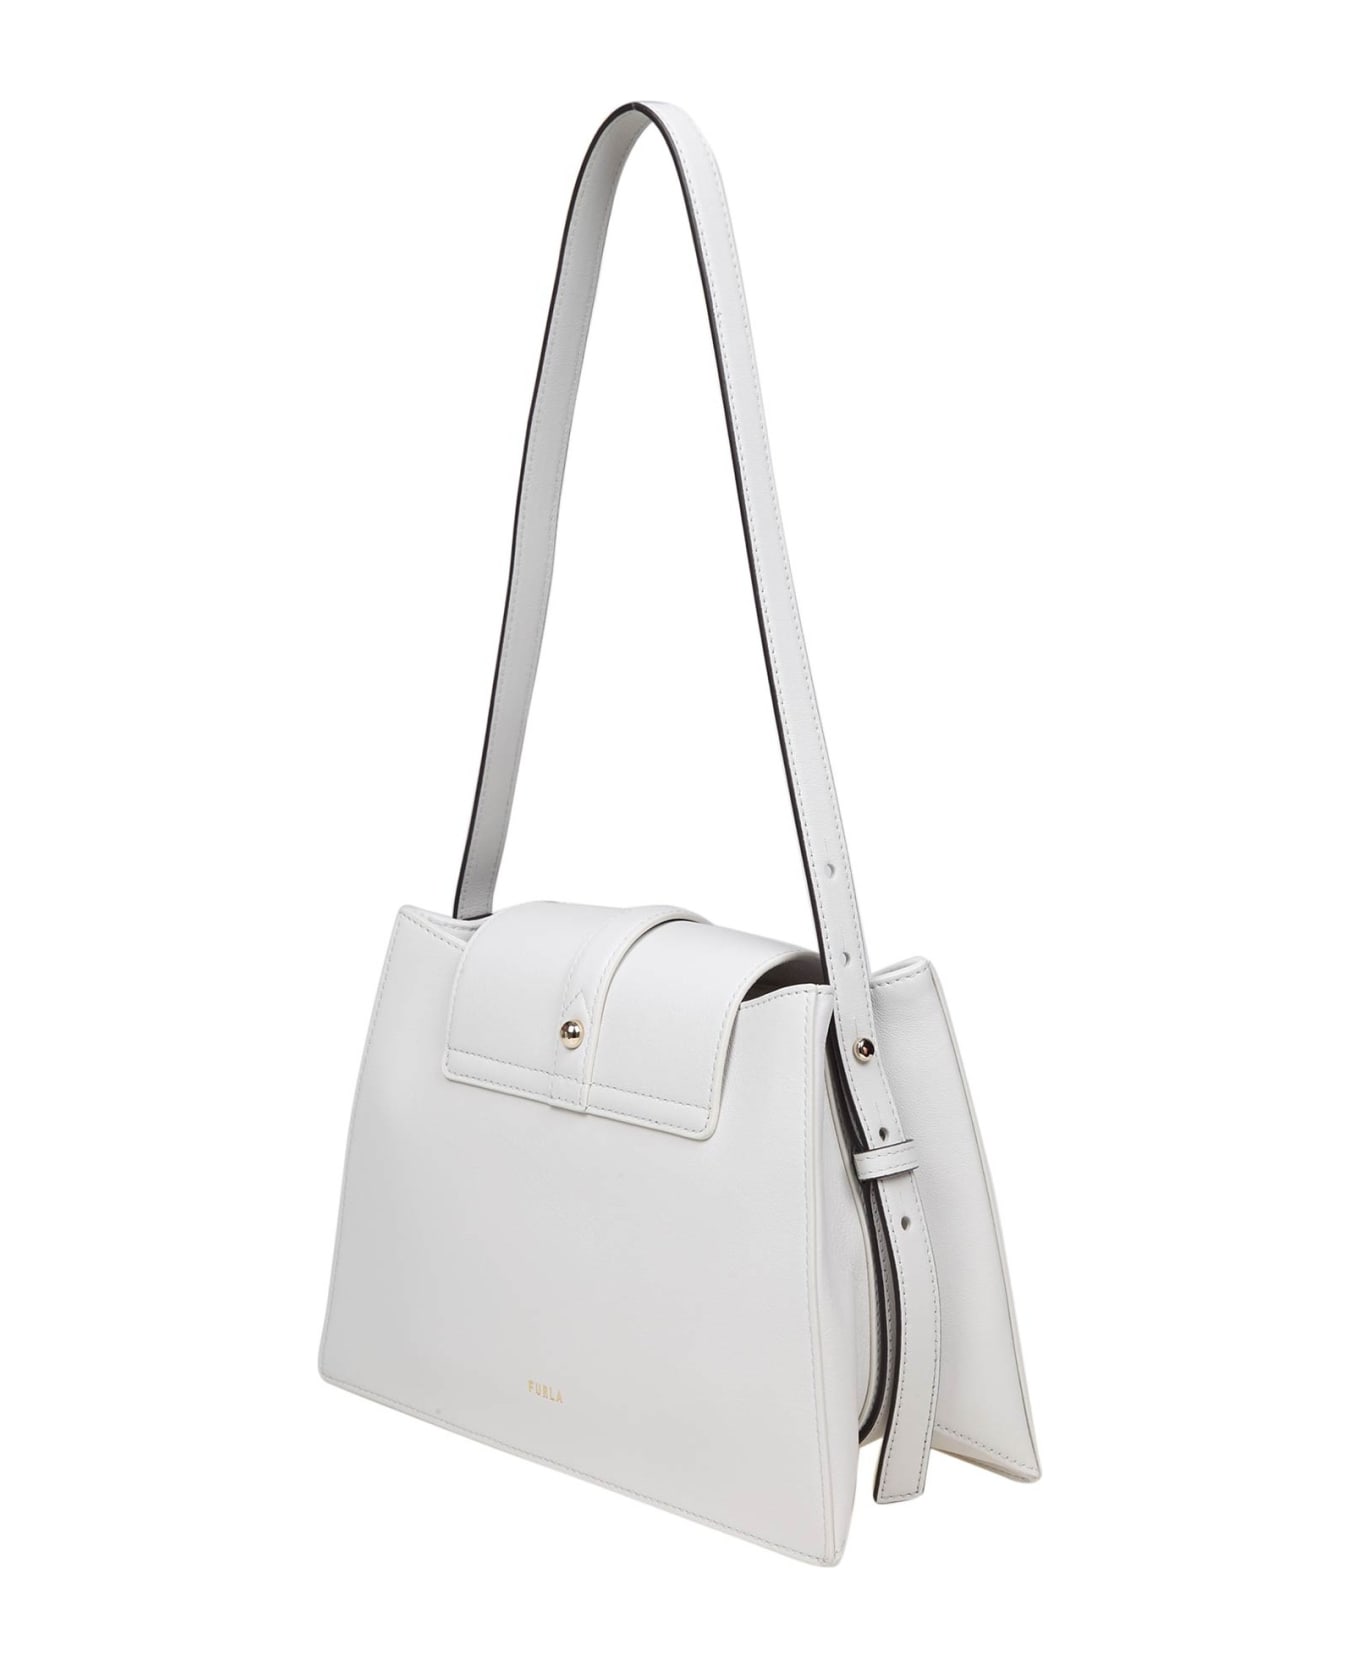 Furla Nuvola S Shoulder Bag In Marshmallow Color Leather - Marshmallow